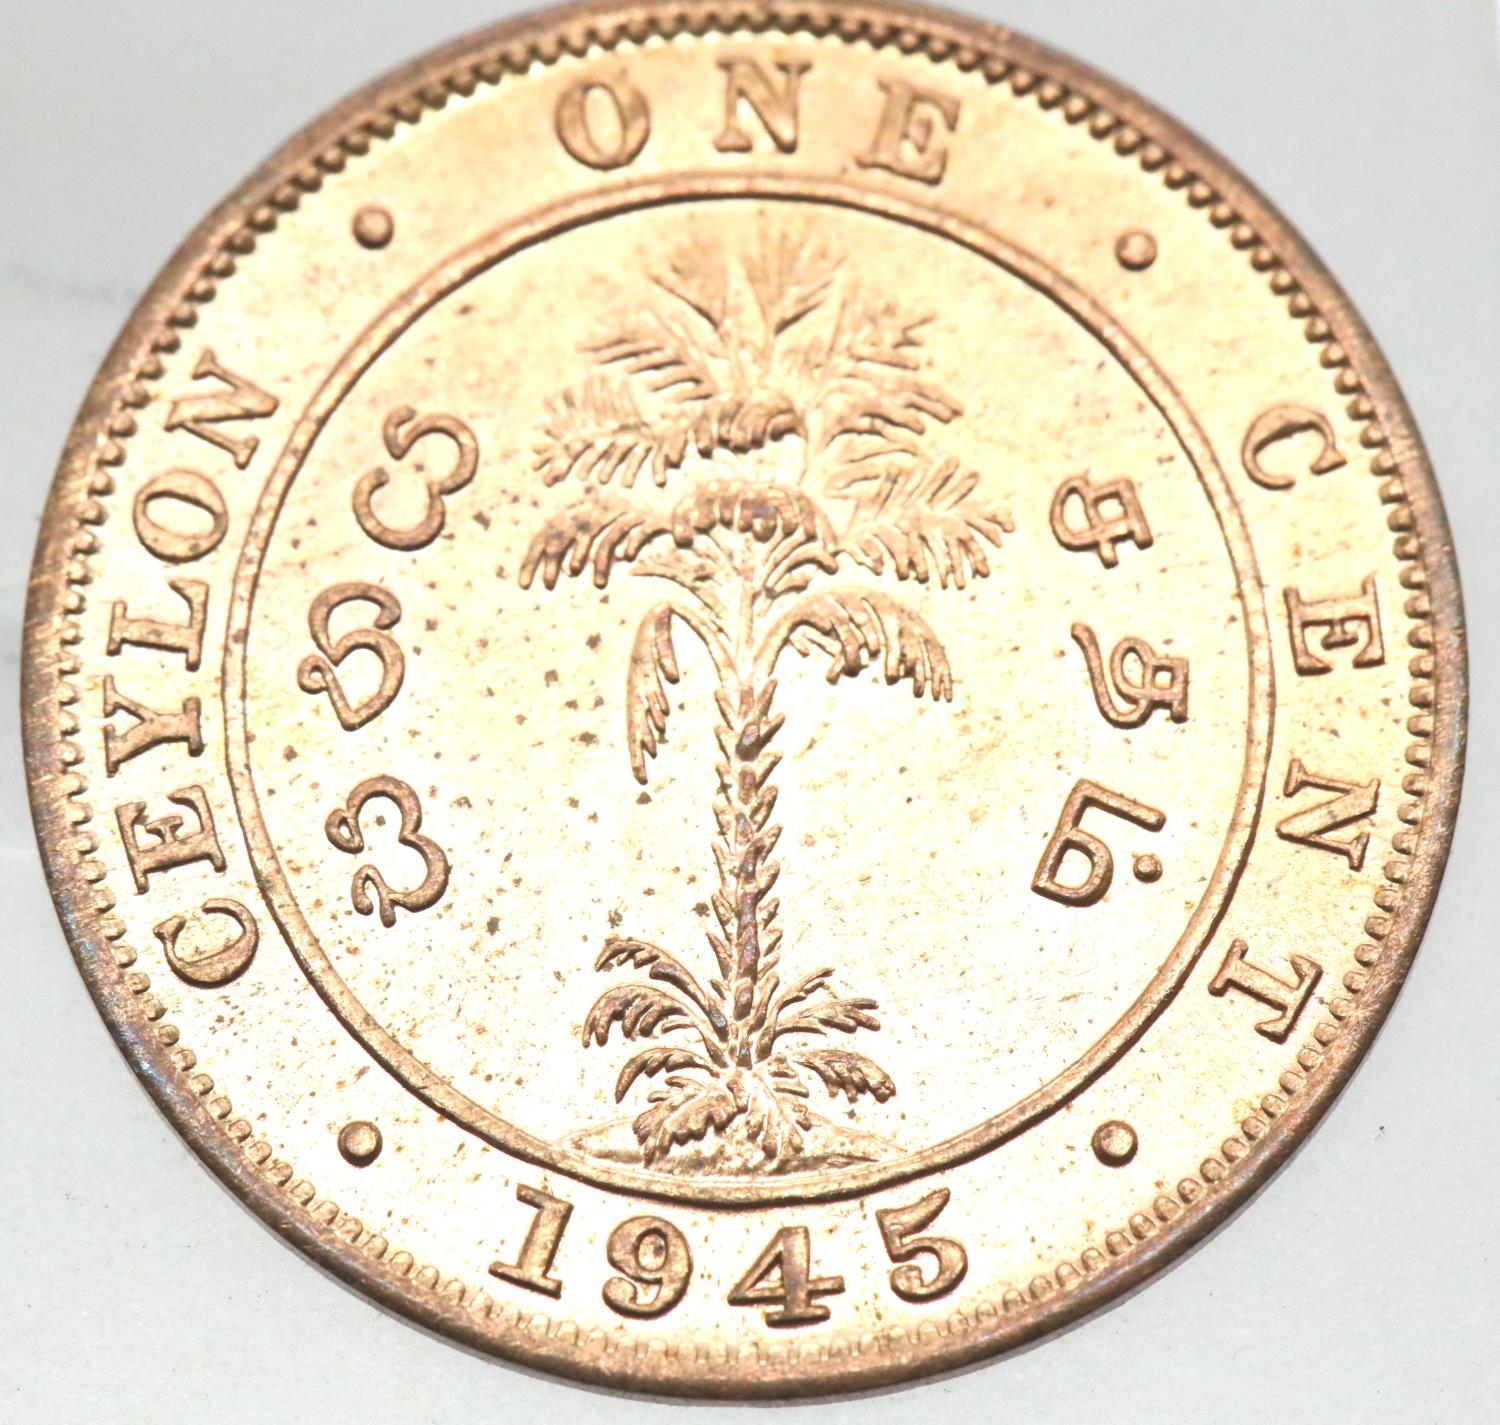 1945 - Ceylon - Uncirculated one Cent piece. P&P Group 1 (£14+VAT for the first lot and £1+VAT for - Image 2 of 2